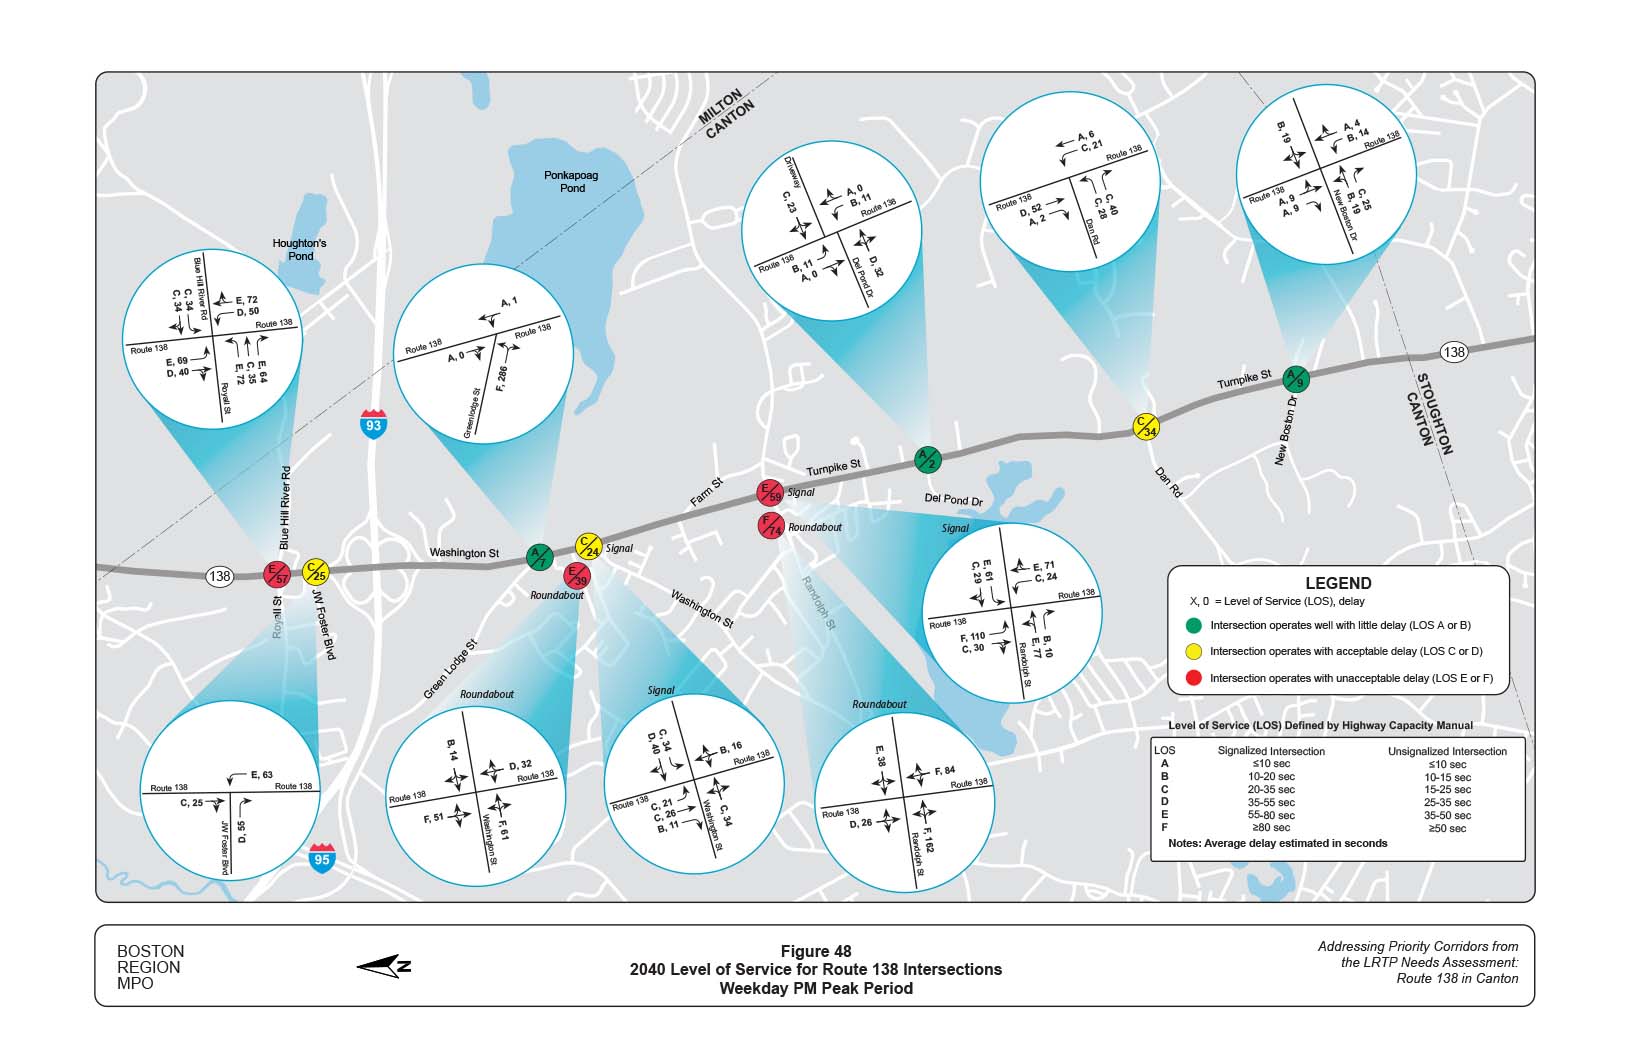 Figure 48 is a map of the study area with diagrams showing the 2040 projected level of service provided by intersections on Route 138 during the weekday PM peak period.